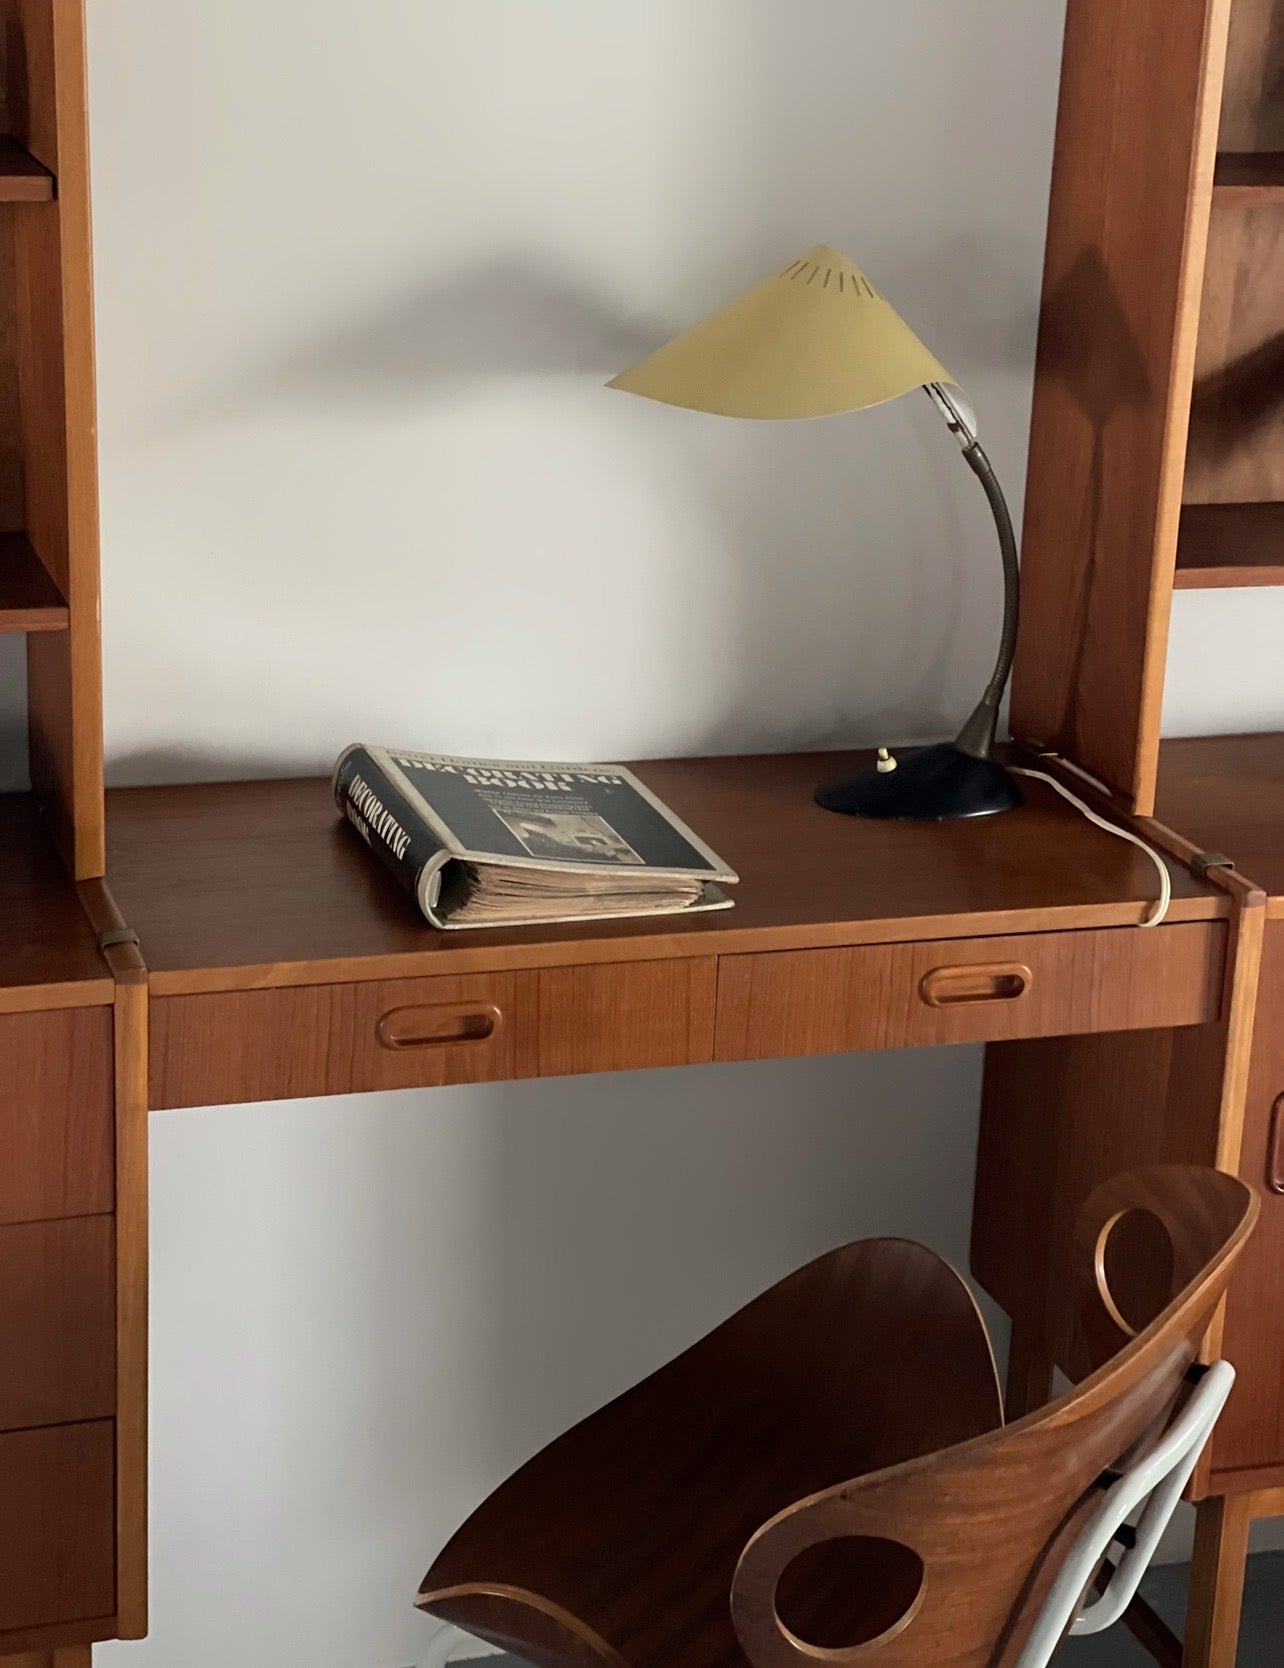 Swedish Bookcase system with desk in teak